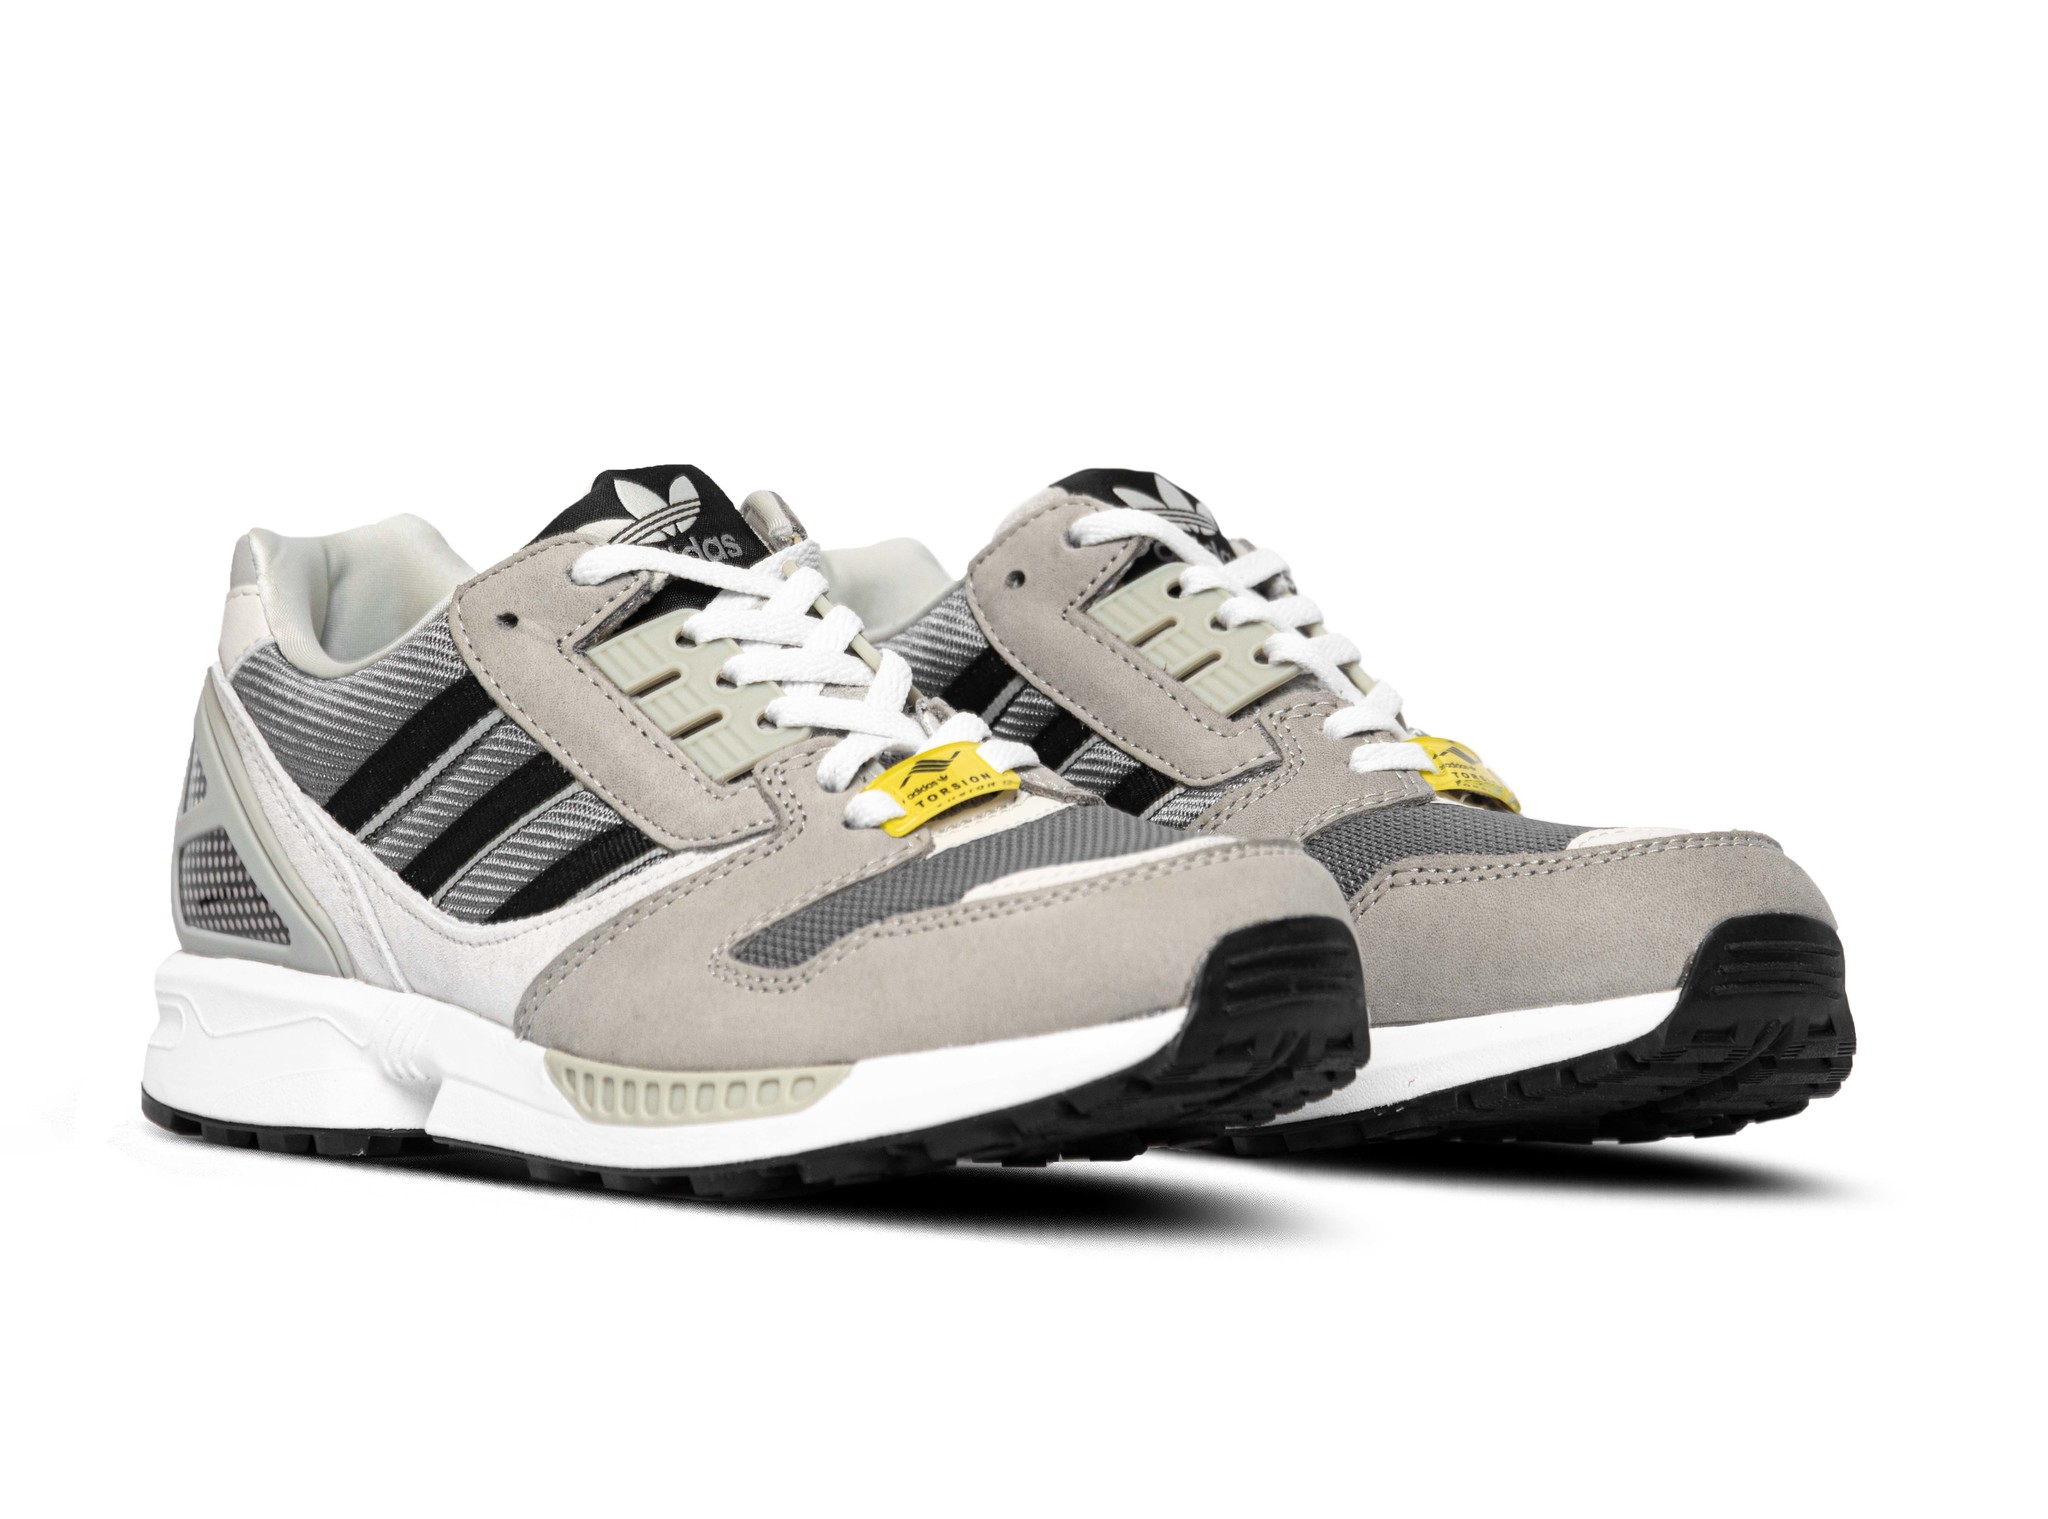 Adidas ZX 8000 Feather Grey Core Black Alumina H02124 | Bruut Online Shop - Sneakers & Clothing Store